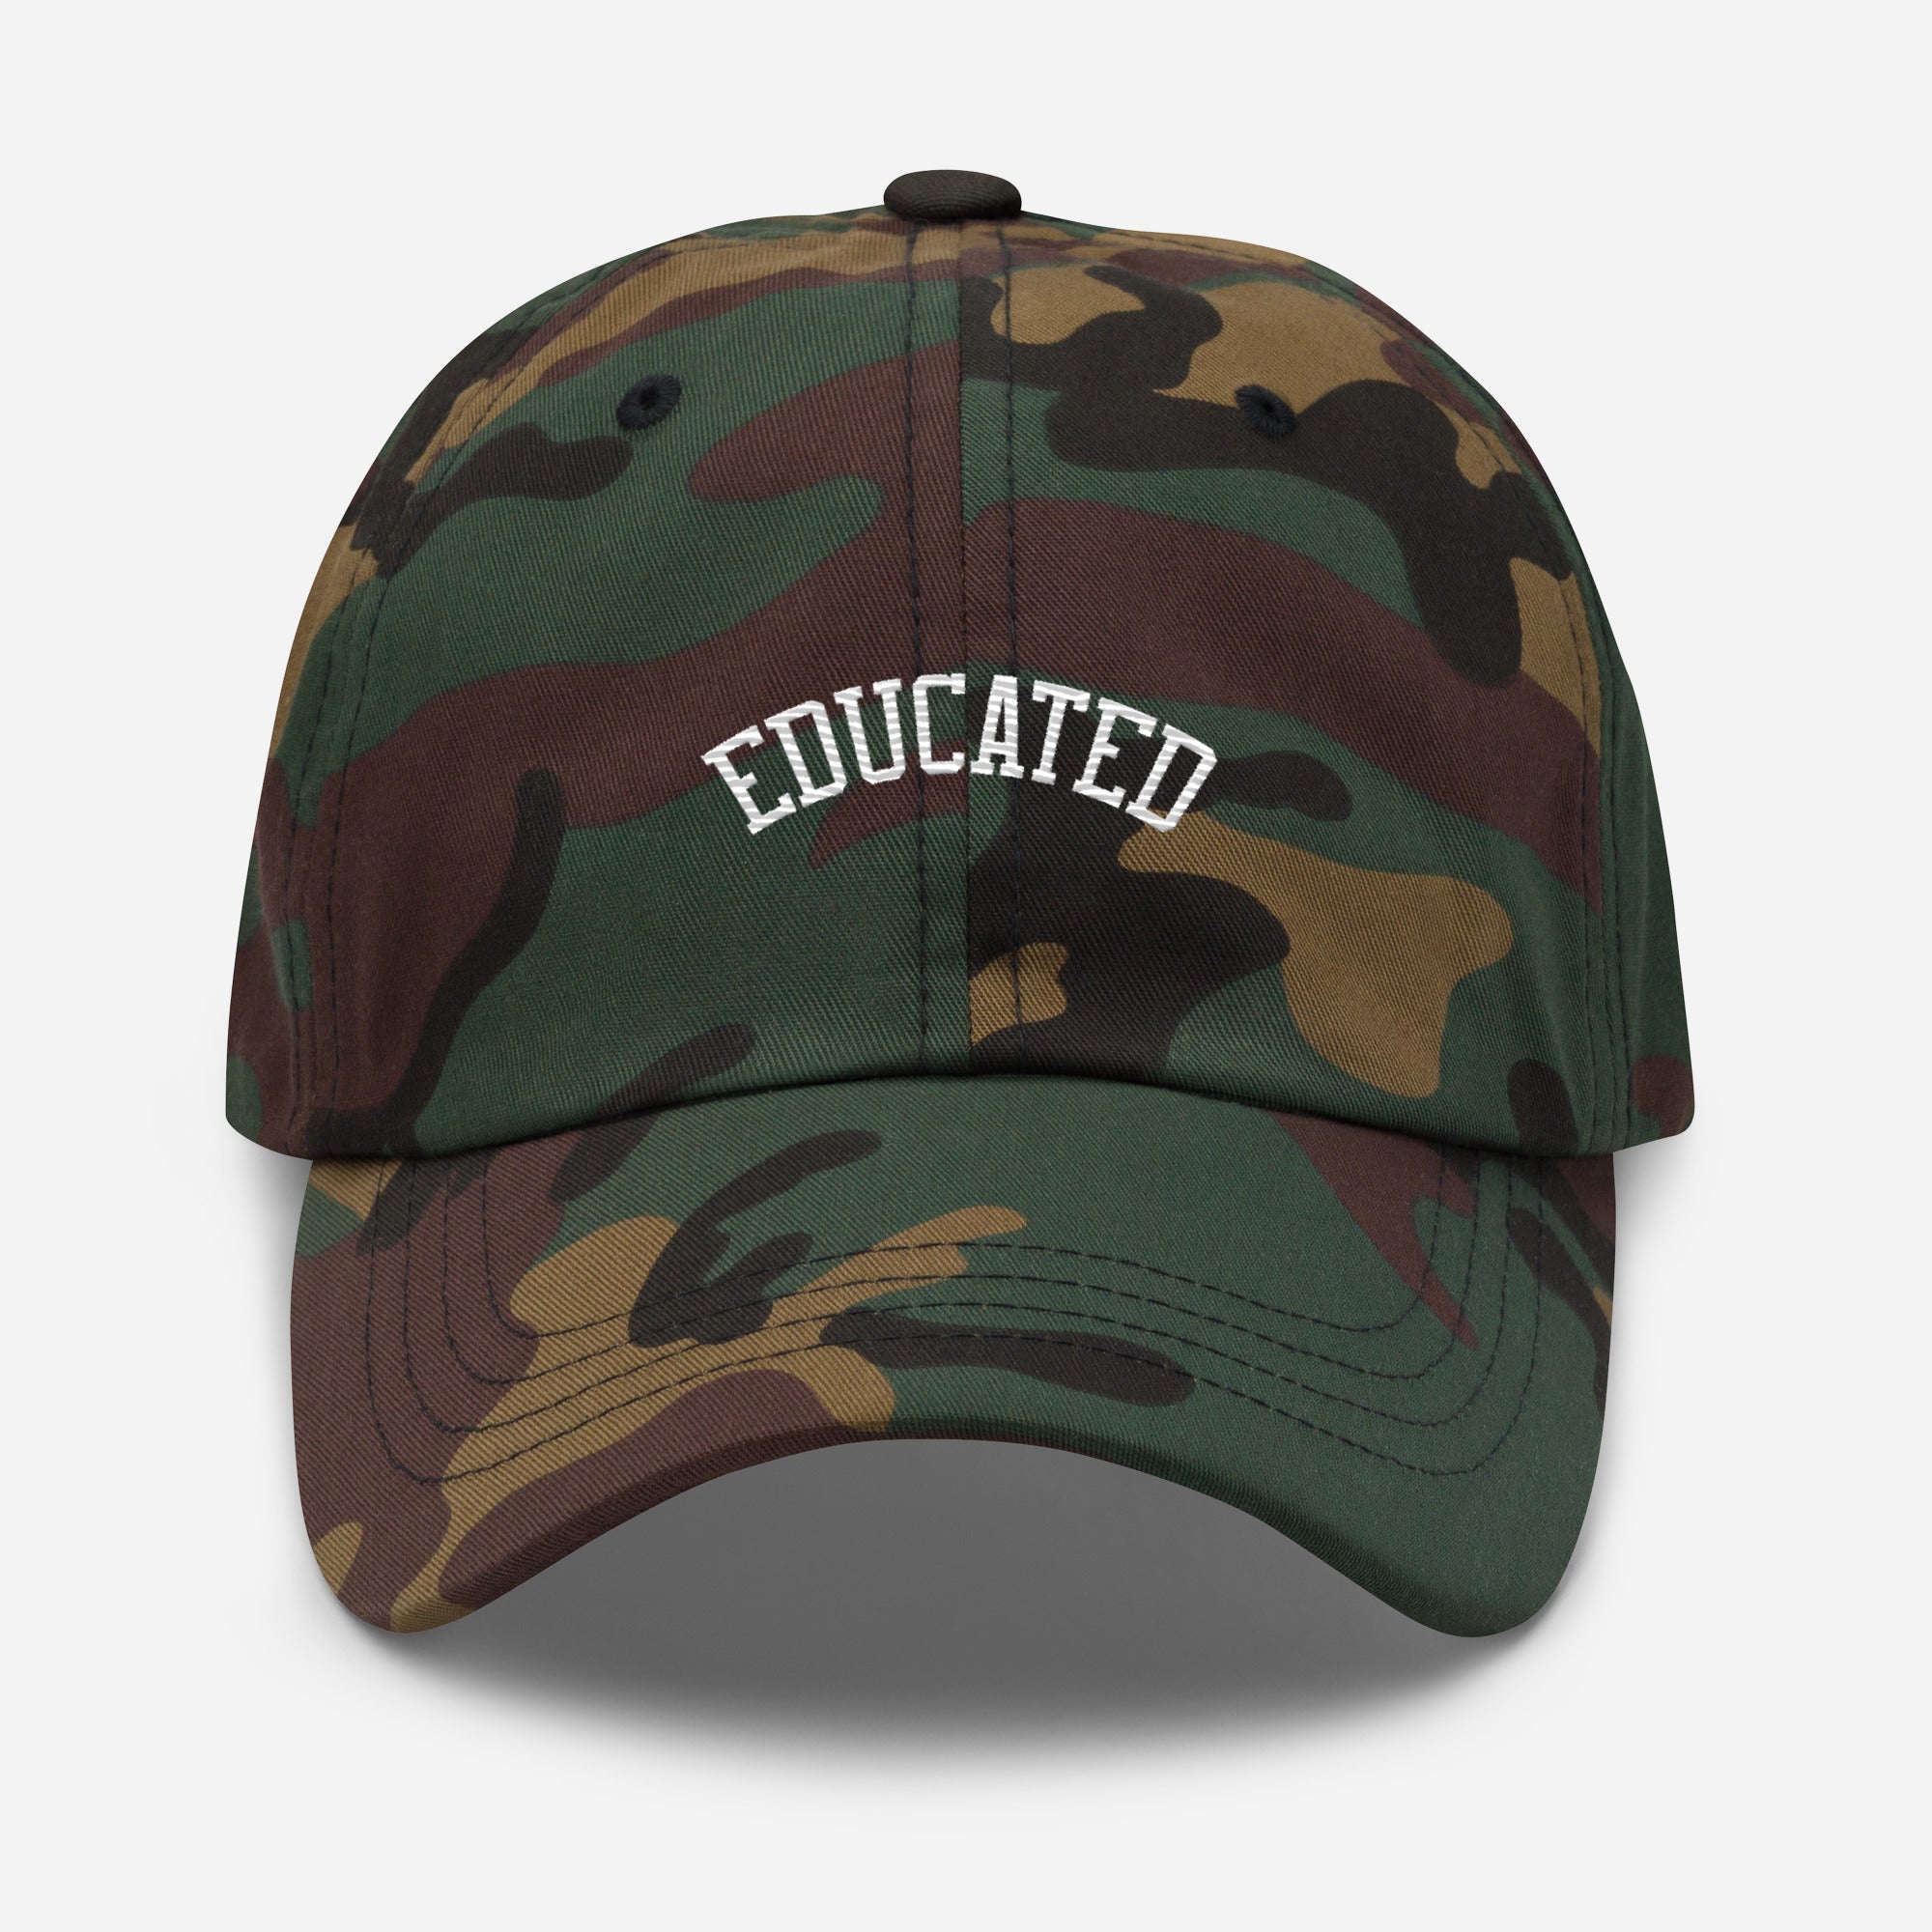 Hat | Educated